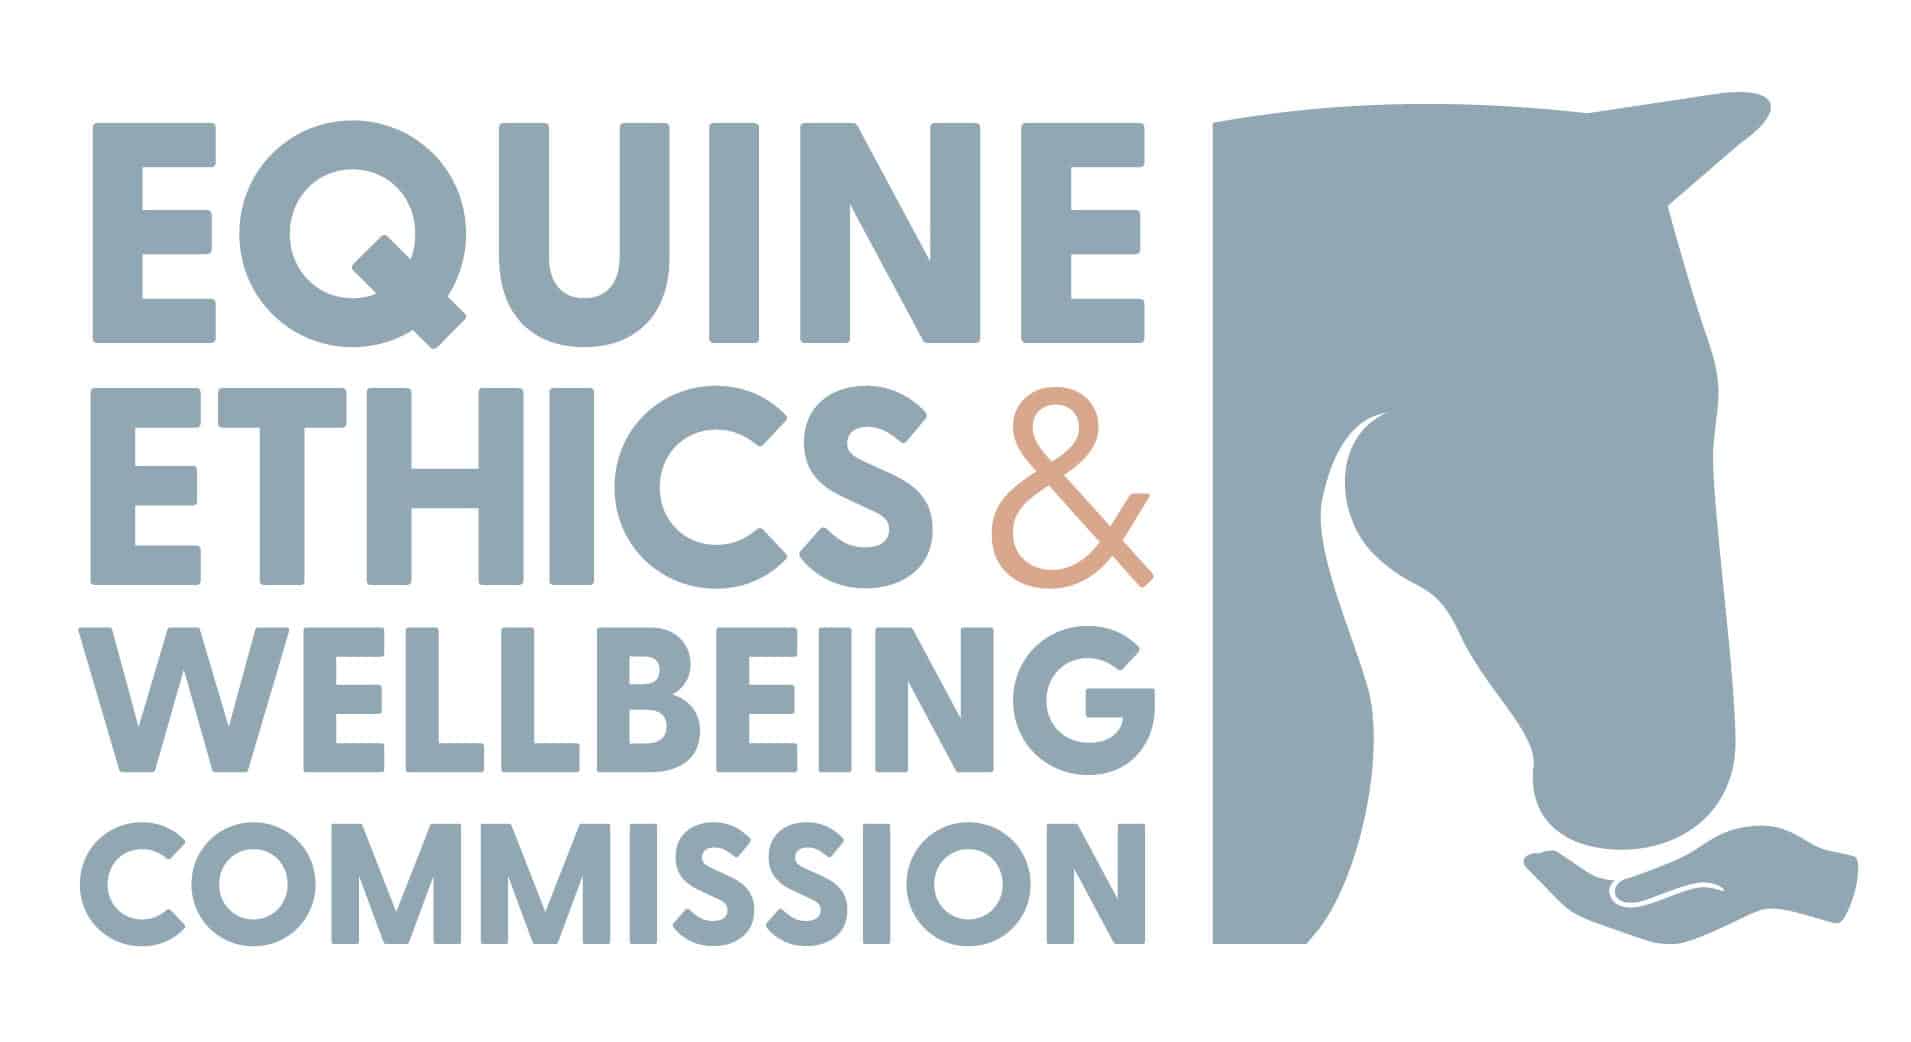 Equine Ethics and Wellbeing Commission